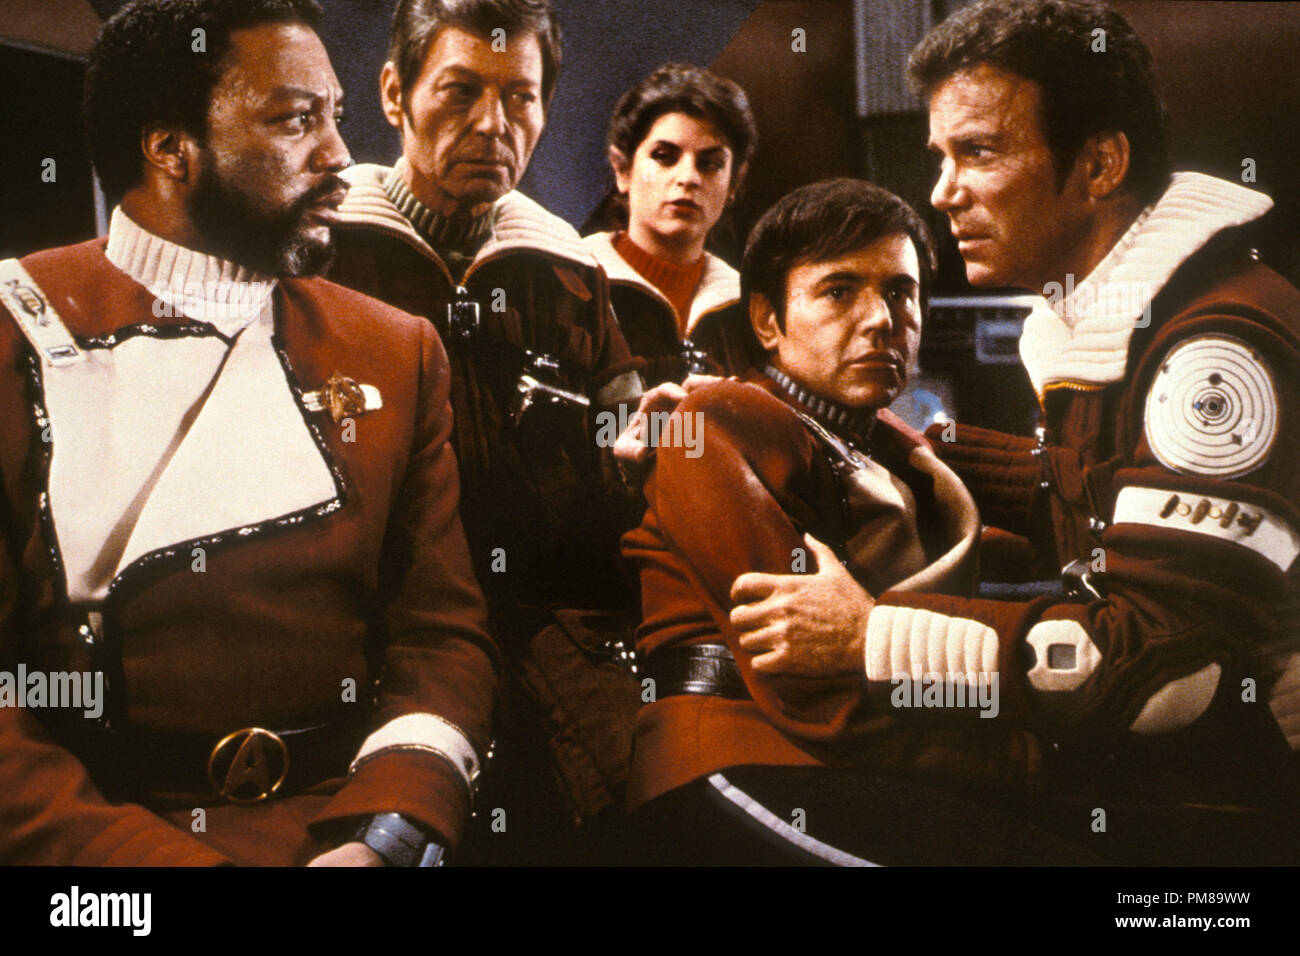 Studio Publicity Still from 'Star Trek II: The Wrath of Khan' Paul Winfield, DeForest Kelley, Kirstie Alley, Walter Koenig, William Shatner © 1982 Paramount All Rights Reserved   File Reference # 31710104THA  For Editorial Use Only Stock Photo